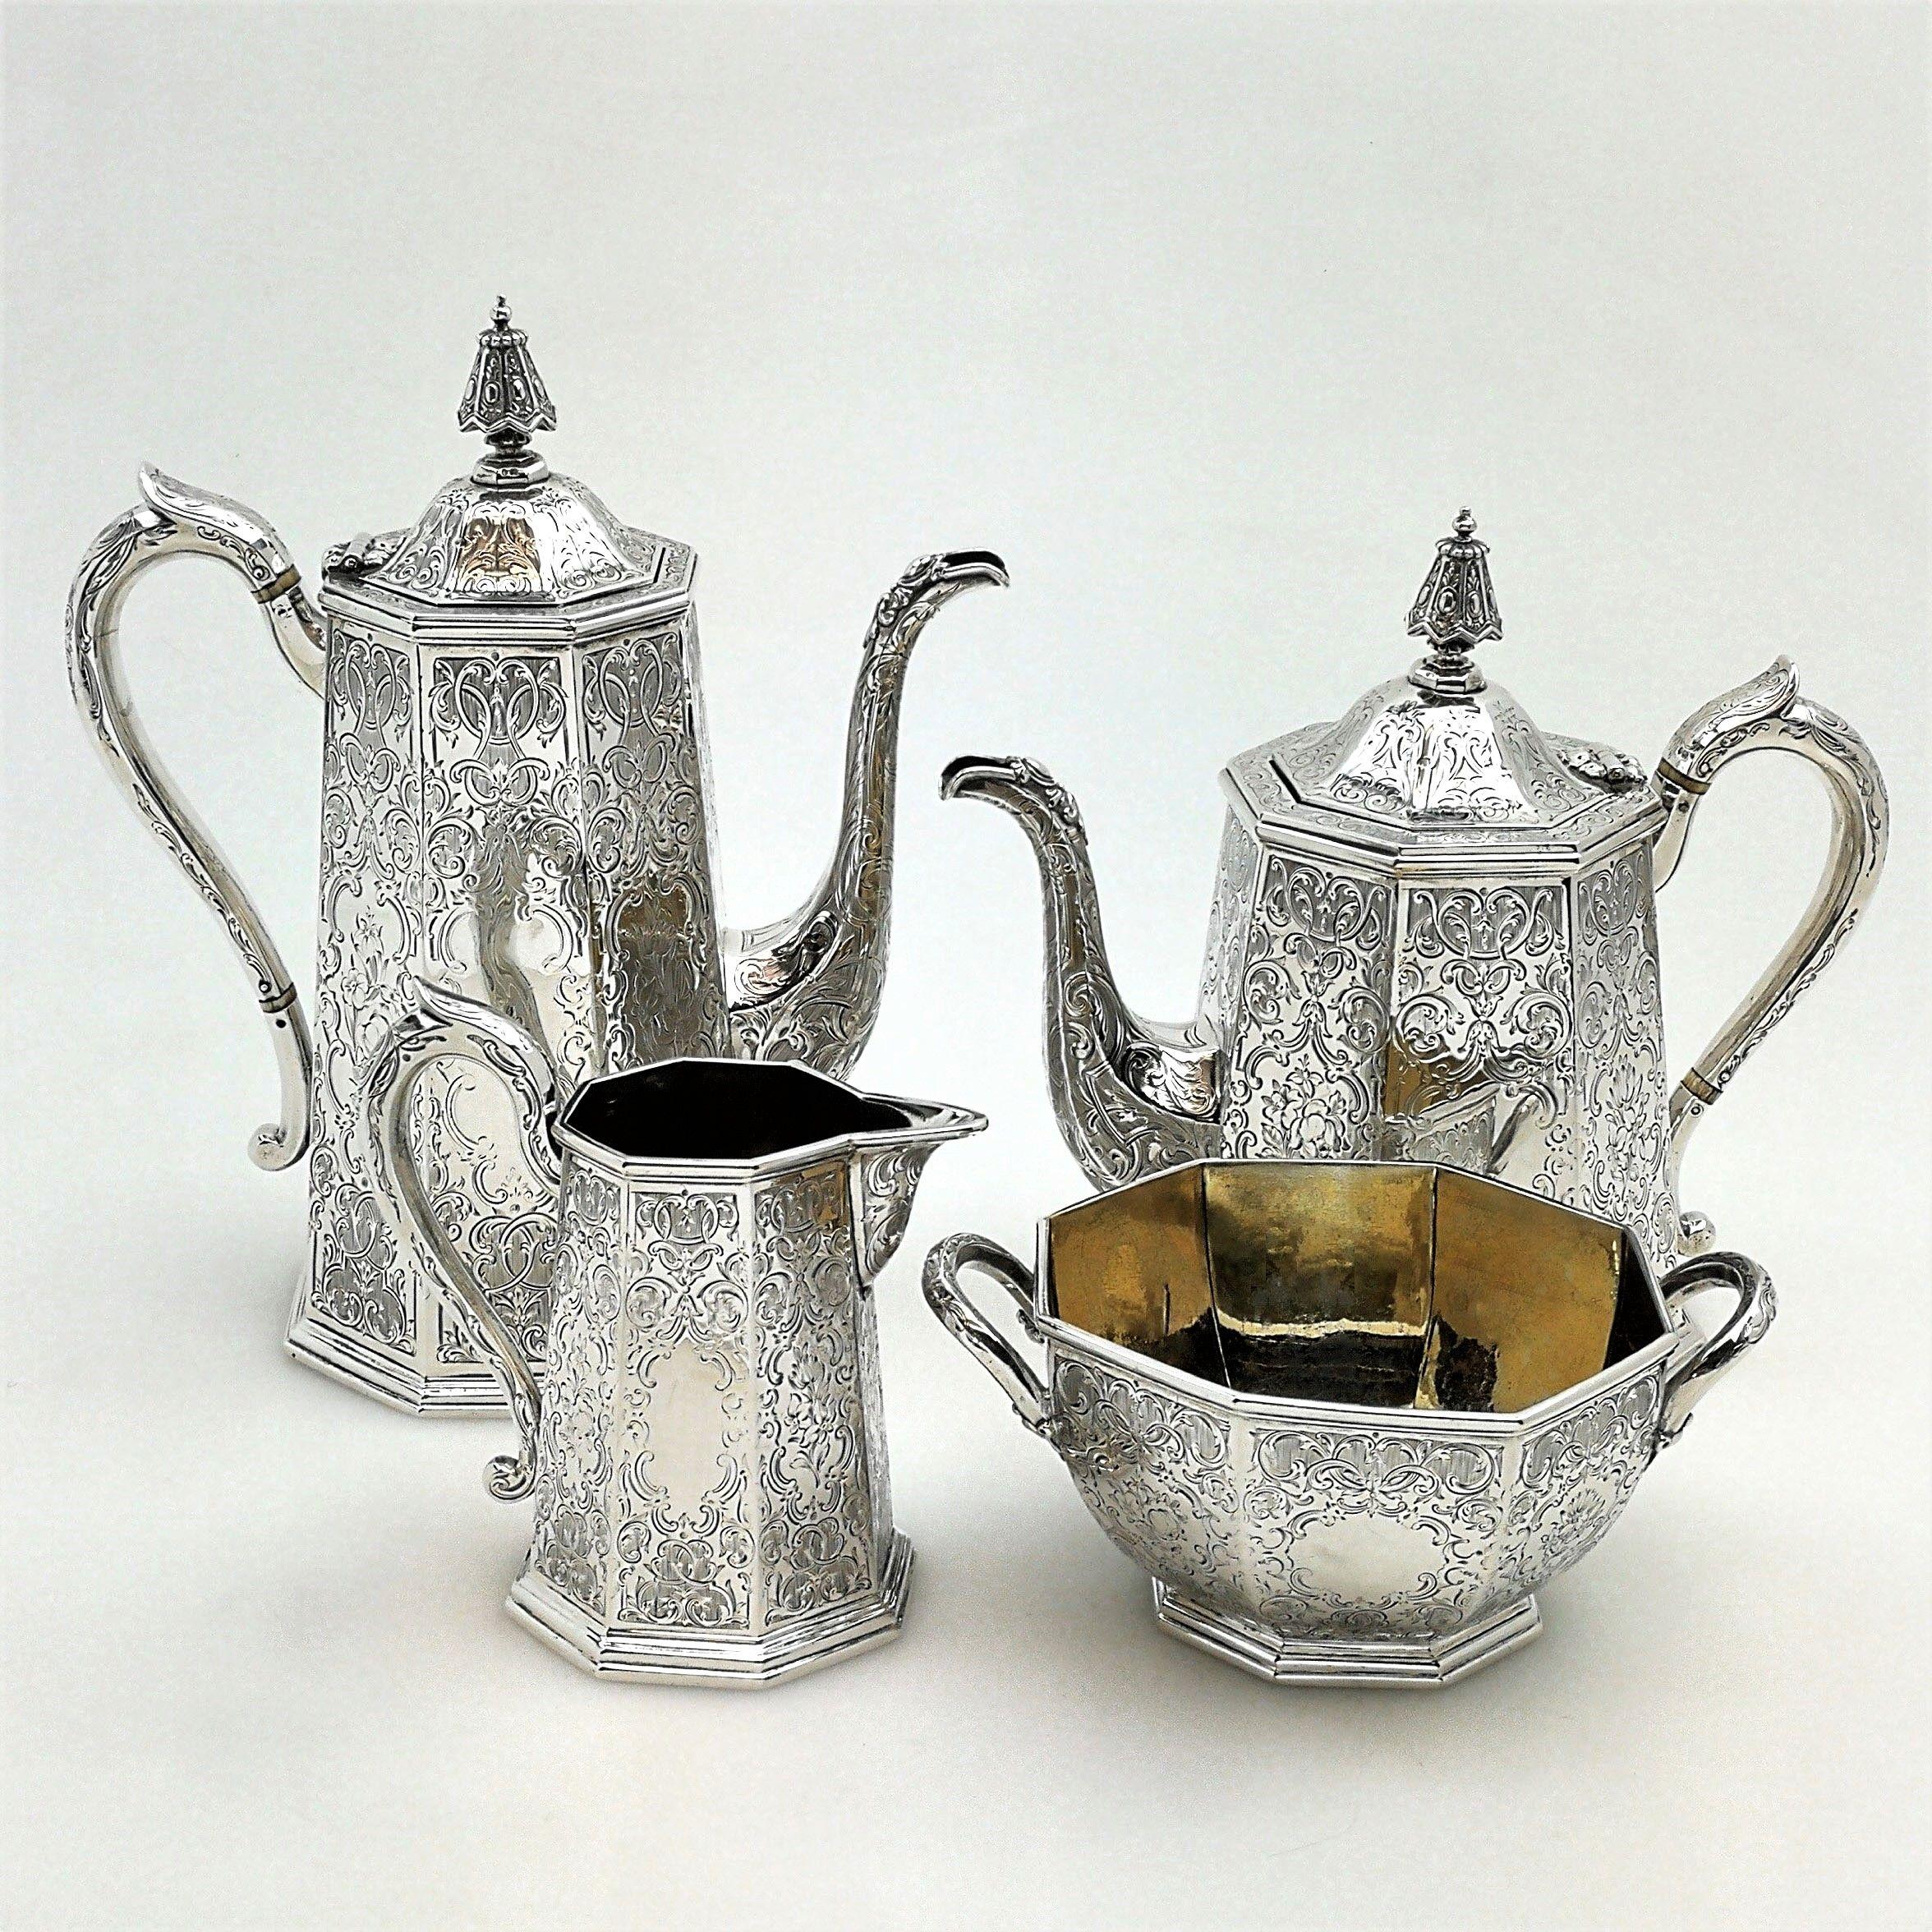 A gorgeous antique Victorian solid silver 4-piece tea set in a slightly tapered octagonal shape. The exterior of each piece is embellished with beautiful ornate engraved designs of floral and scroll patterning. Two opposite panels on each piece have